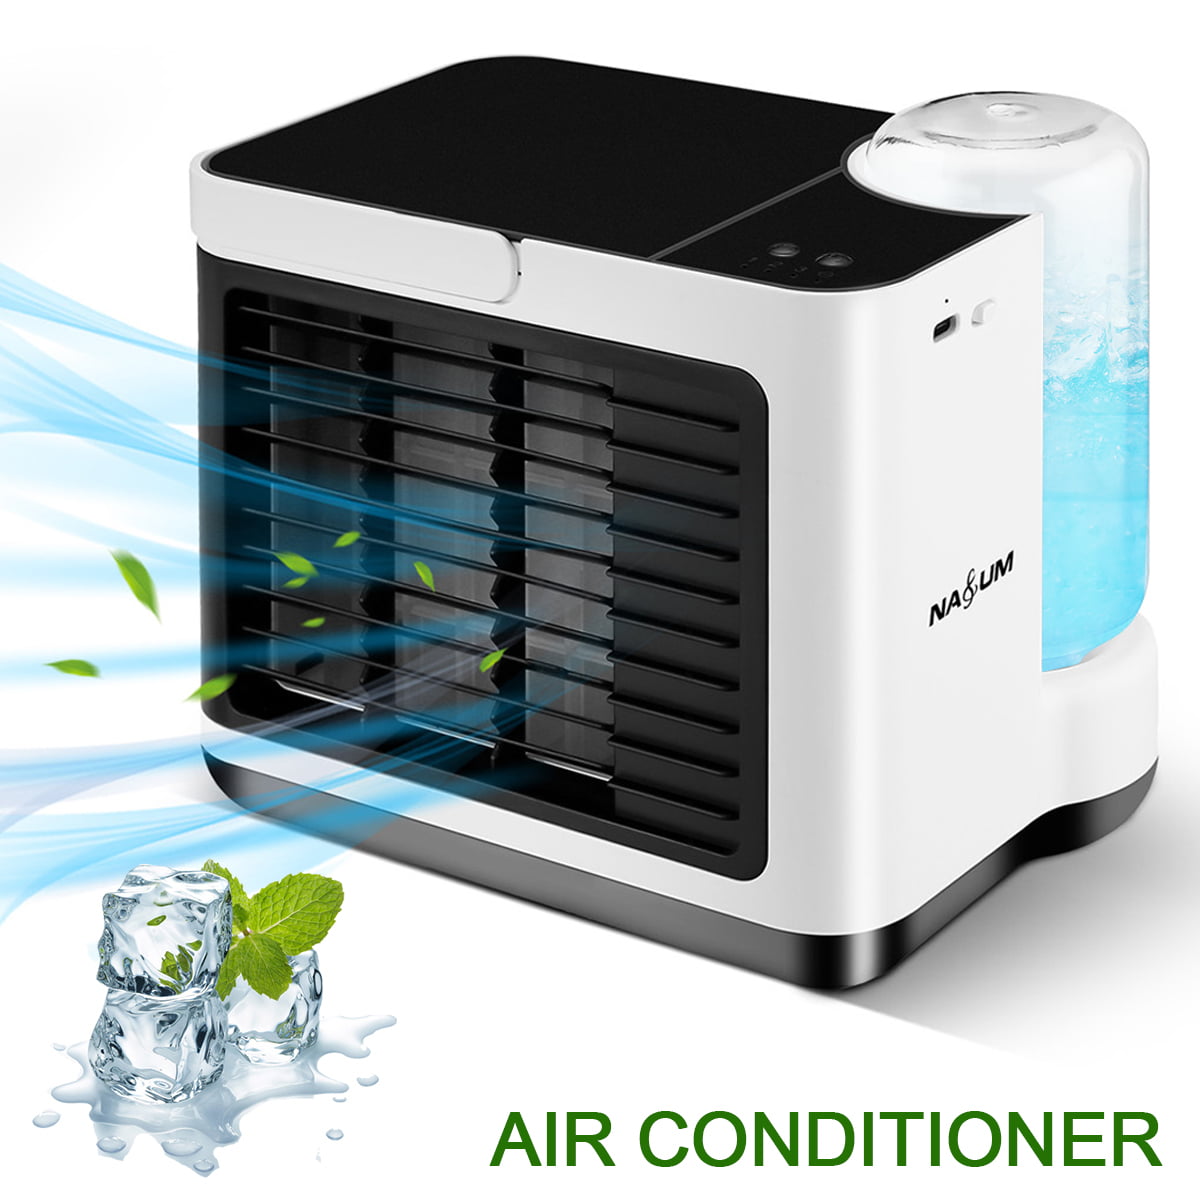 3-in-1 Air Cooler Portable Mini Air Conditioner USB Desk Evaporative Coolers Fans Humidifier for Home Bedroom Office Desktop with 3 Color Light BaojunHT® Blue 